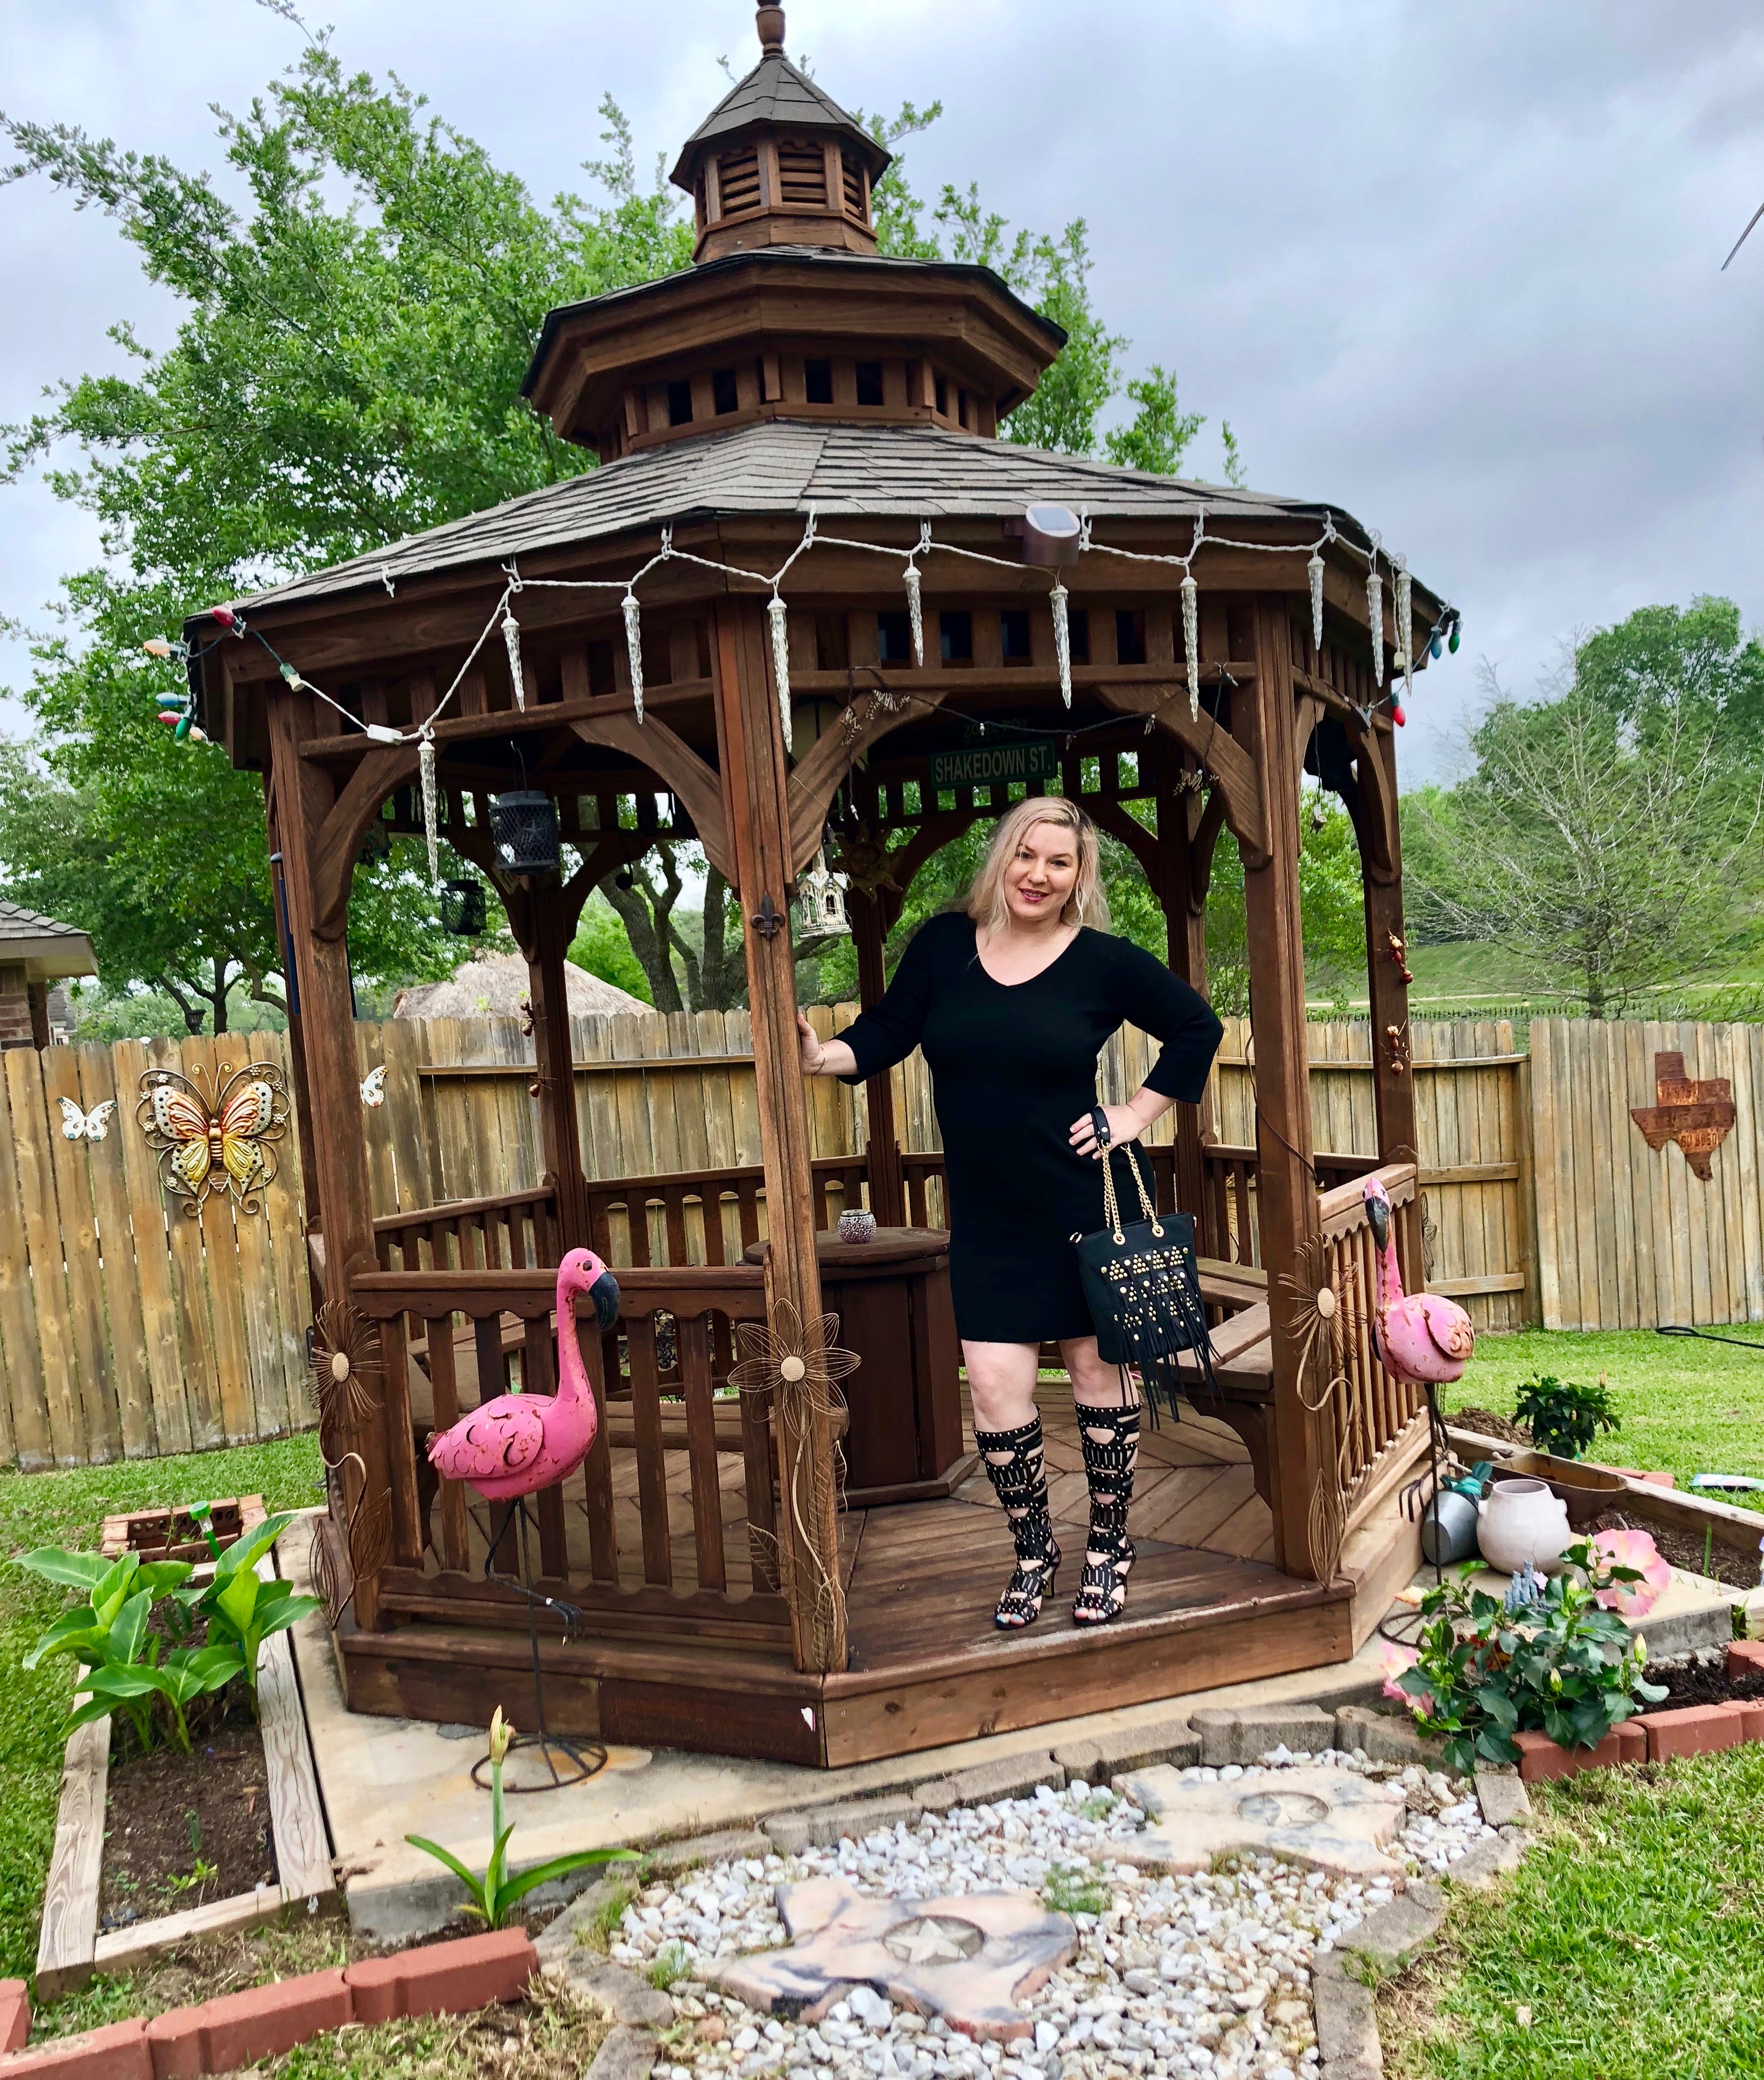 A Midnight Velvet customer in a gazebo, wearing a black dress, tall black studded boots, with a matching bag.